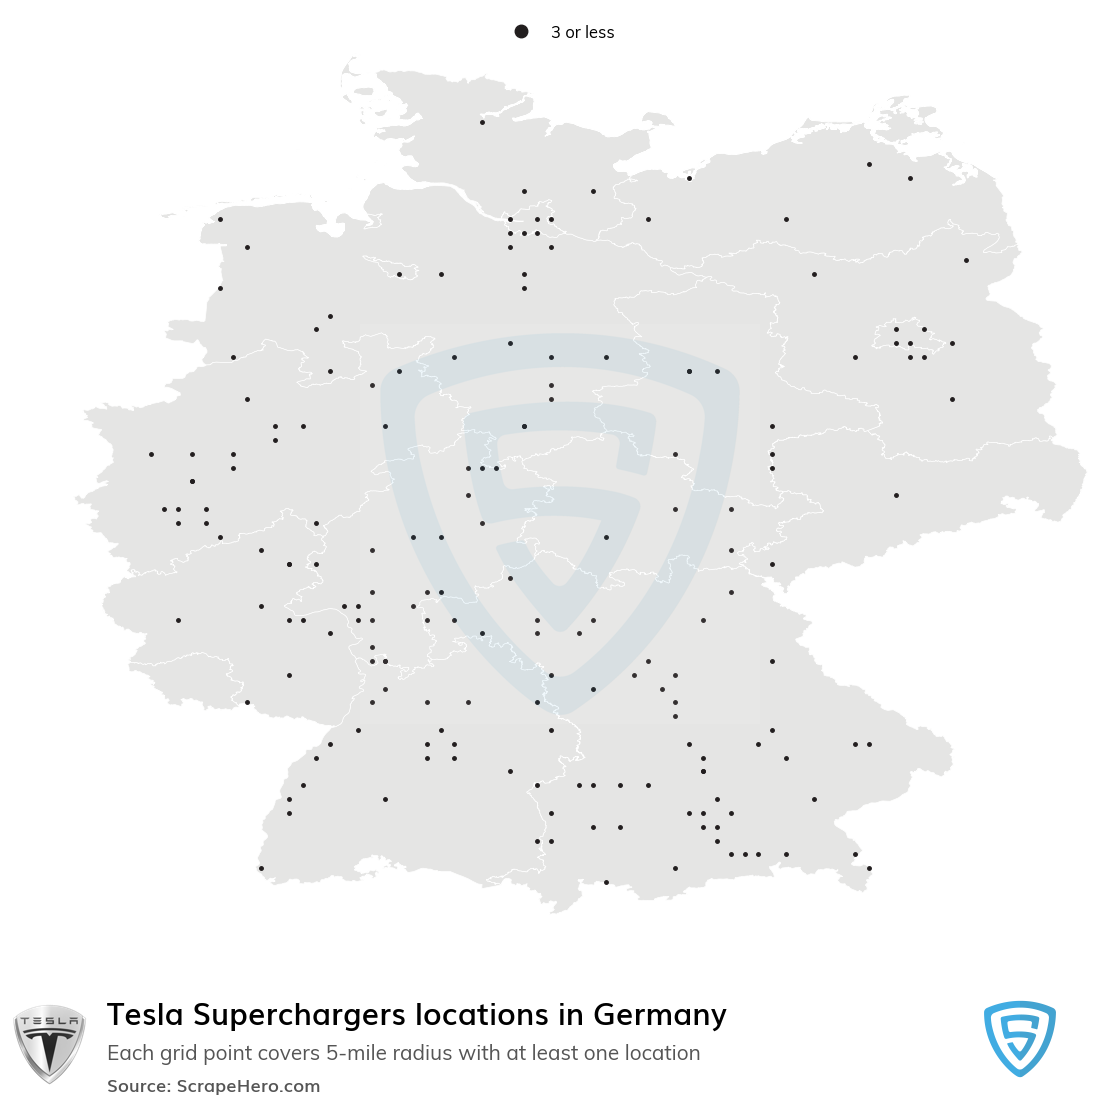 Tesla Superchargers locations